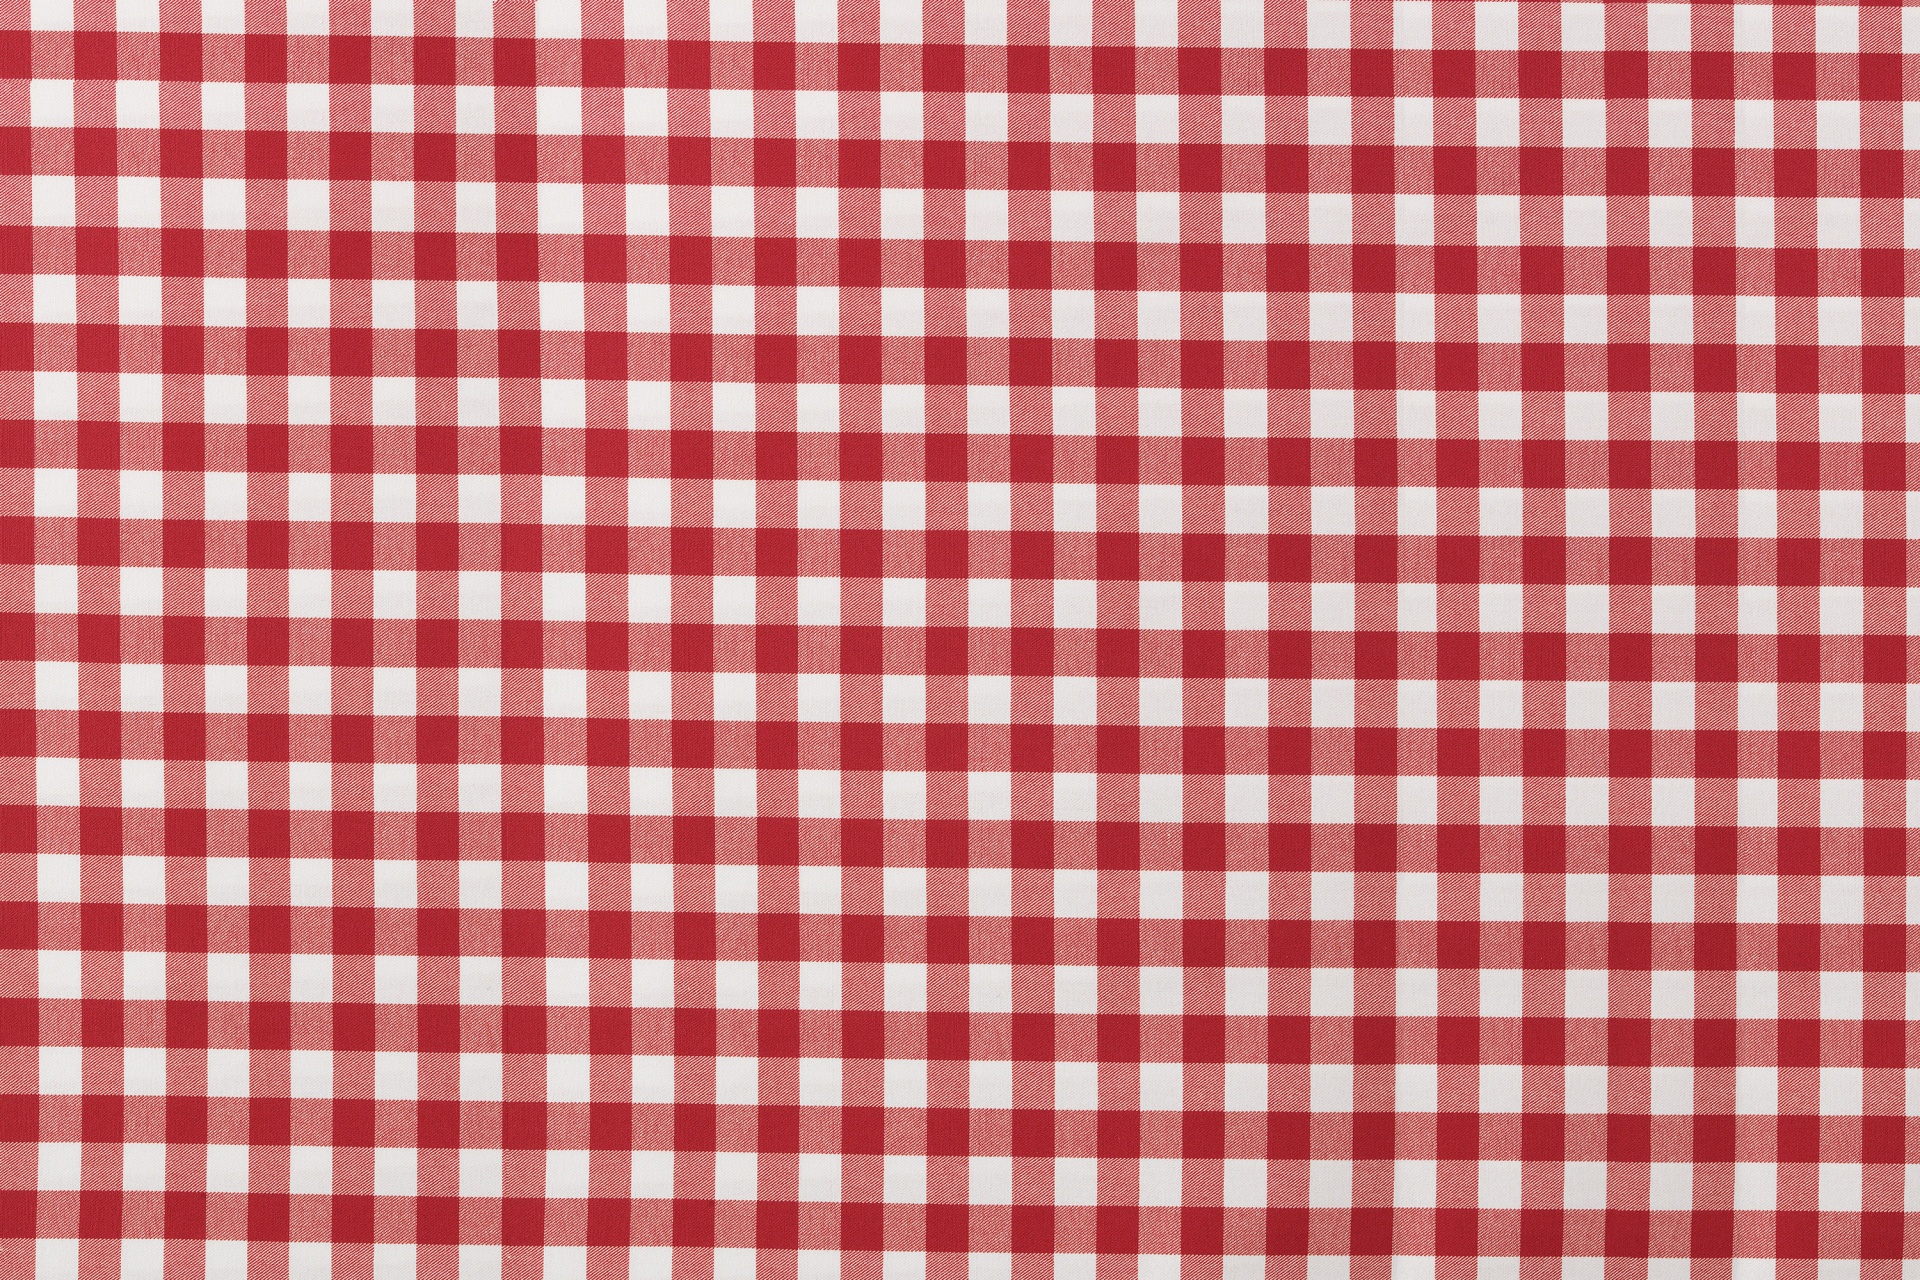 Checkered Table Cloth 1 Free Stock Photo - Public Domain Pictures